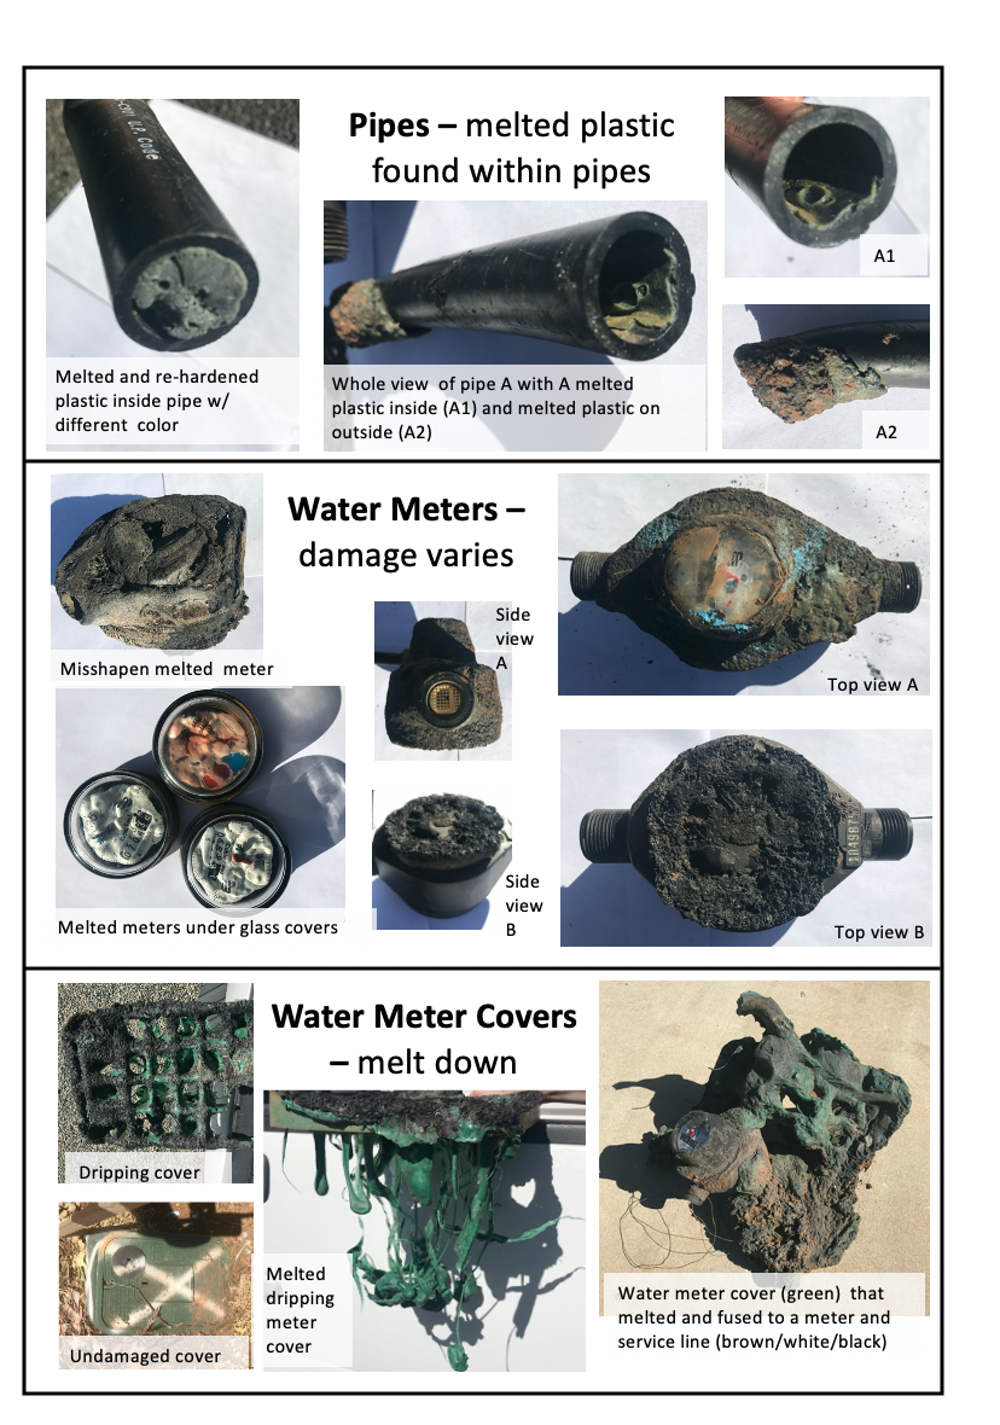 Pipes, water meters and meter covers after wildfires destroyed them. (Graphic courtesy of Caitlin Proctor, Amisha Shah, David Yu, and Andrew Whelton/Purdue University)